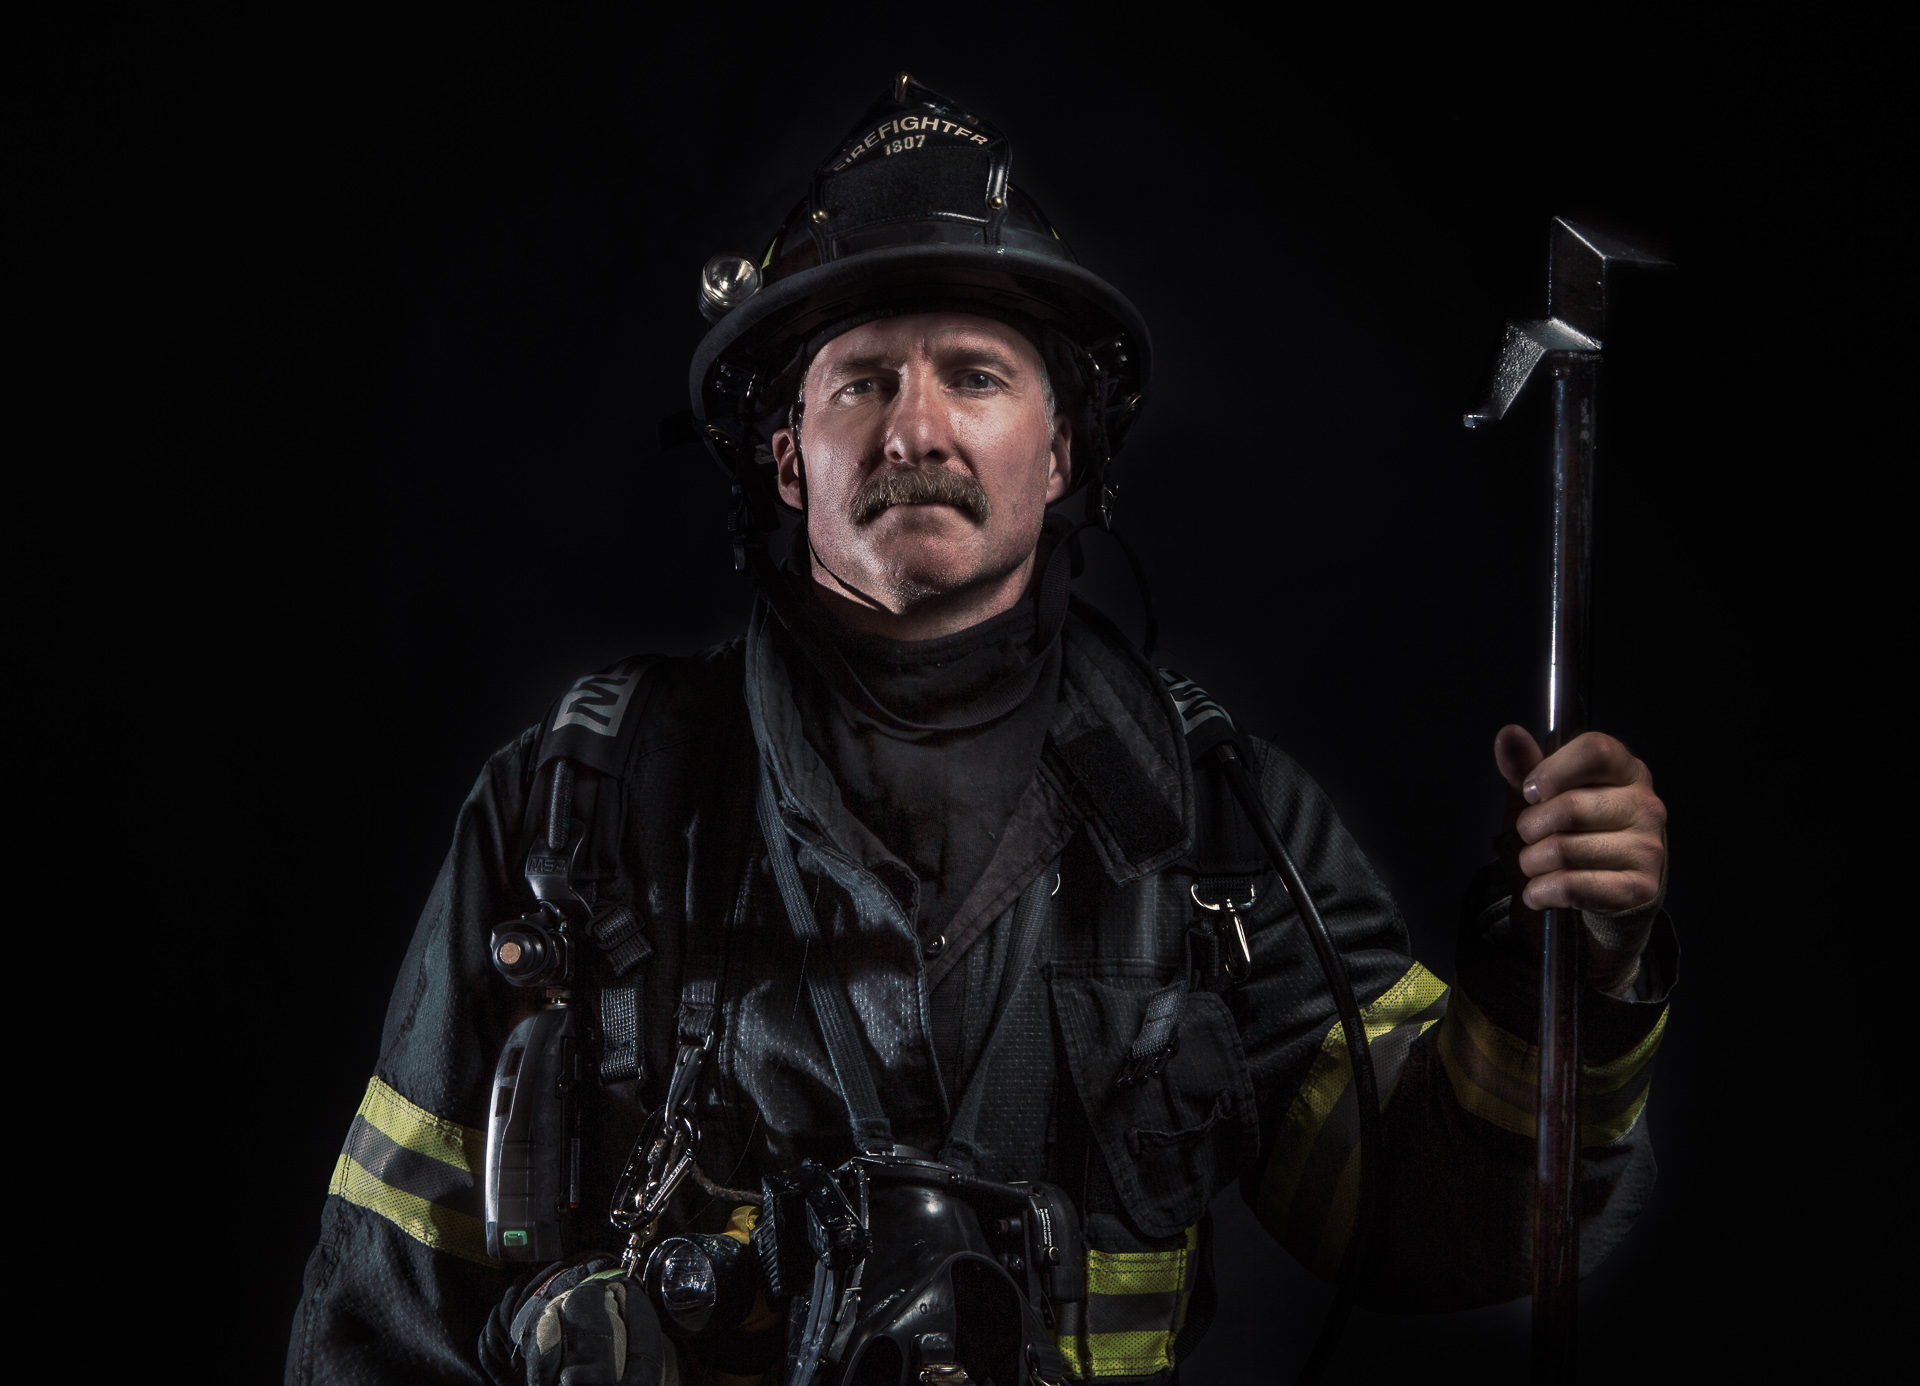 American Heroes/ Fire Fighters/Industry/Portraits